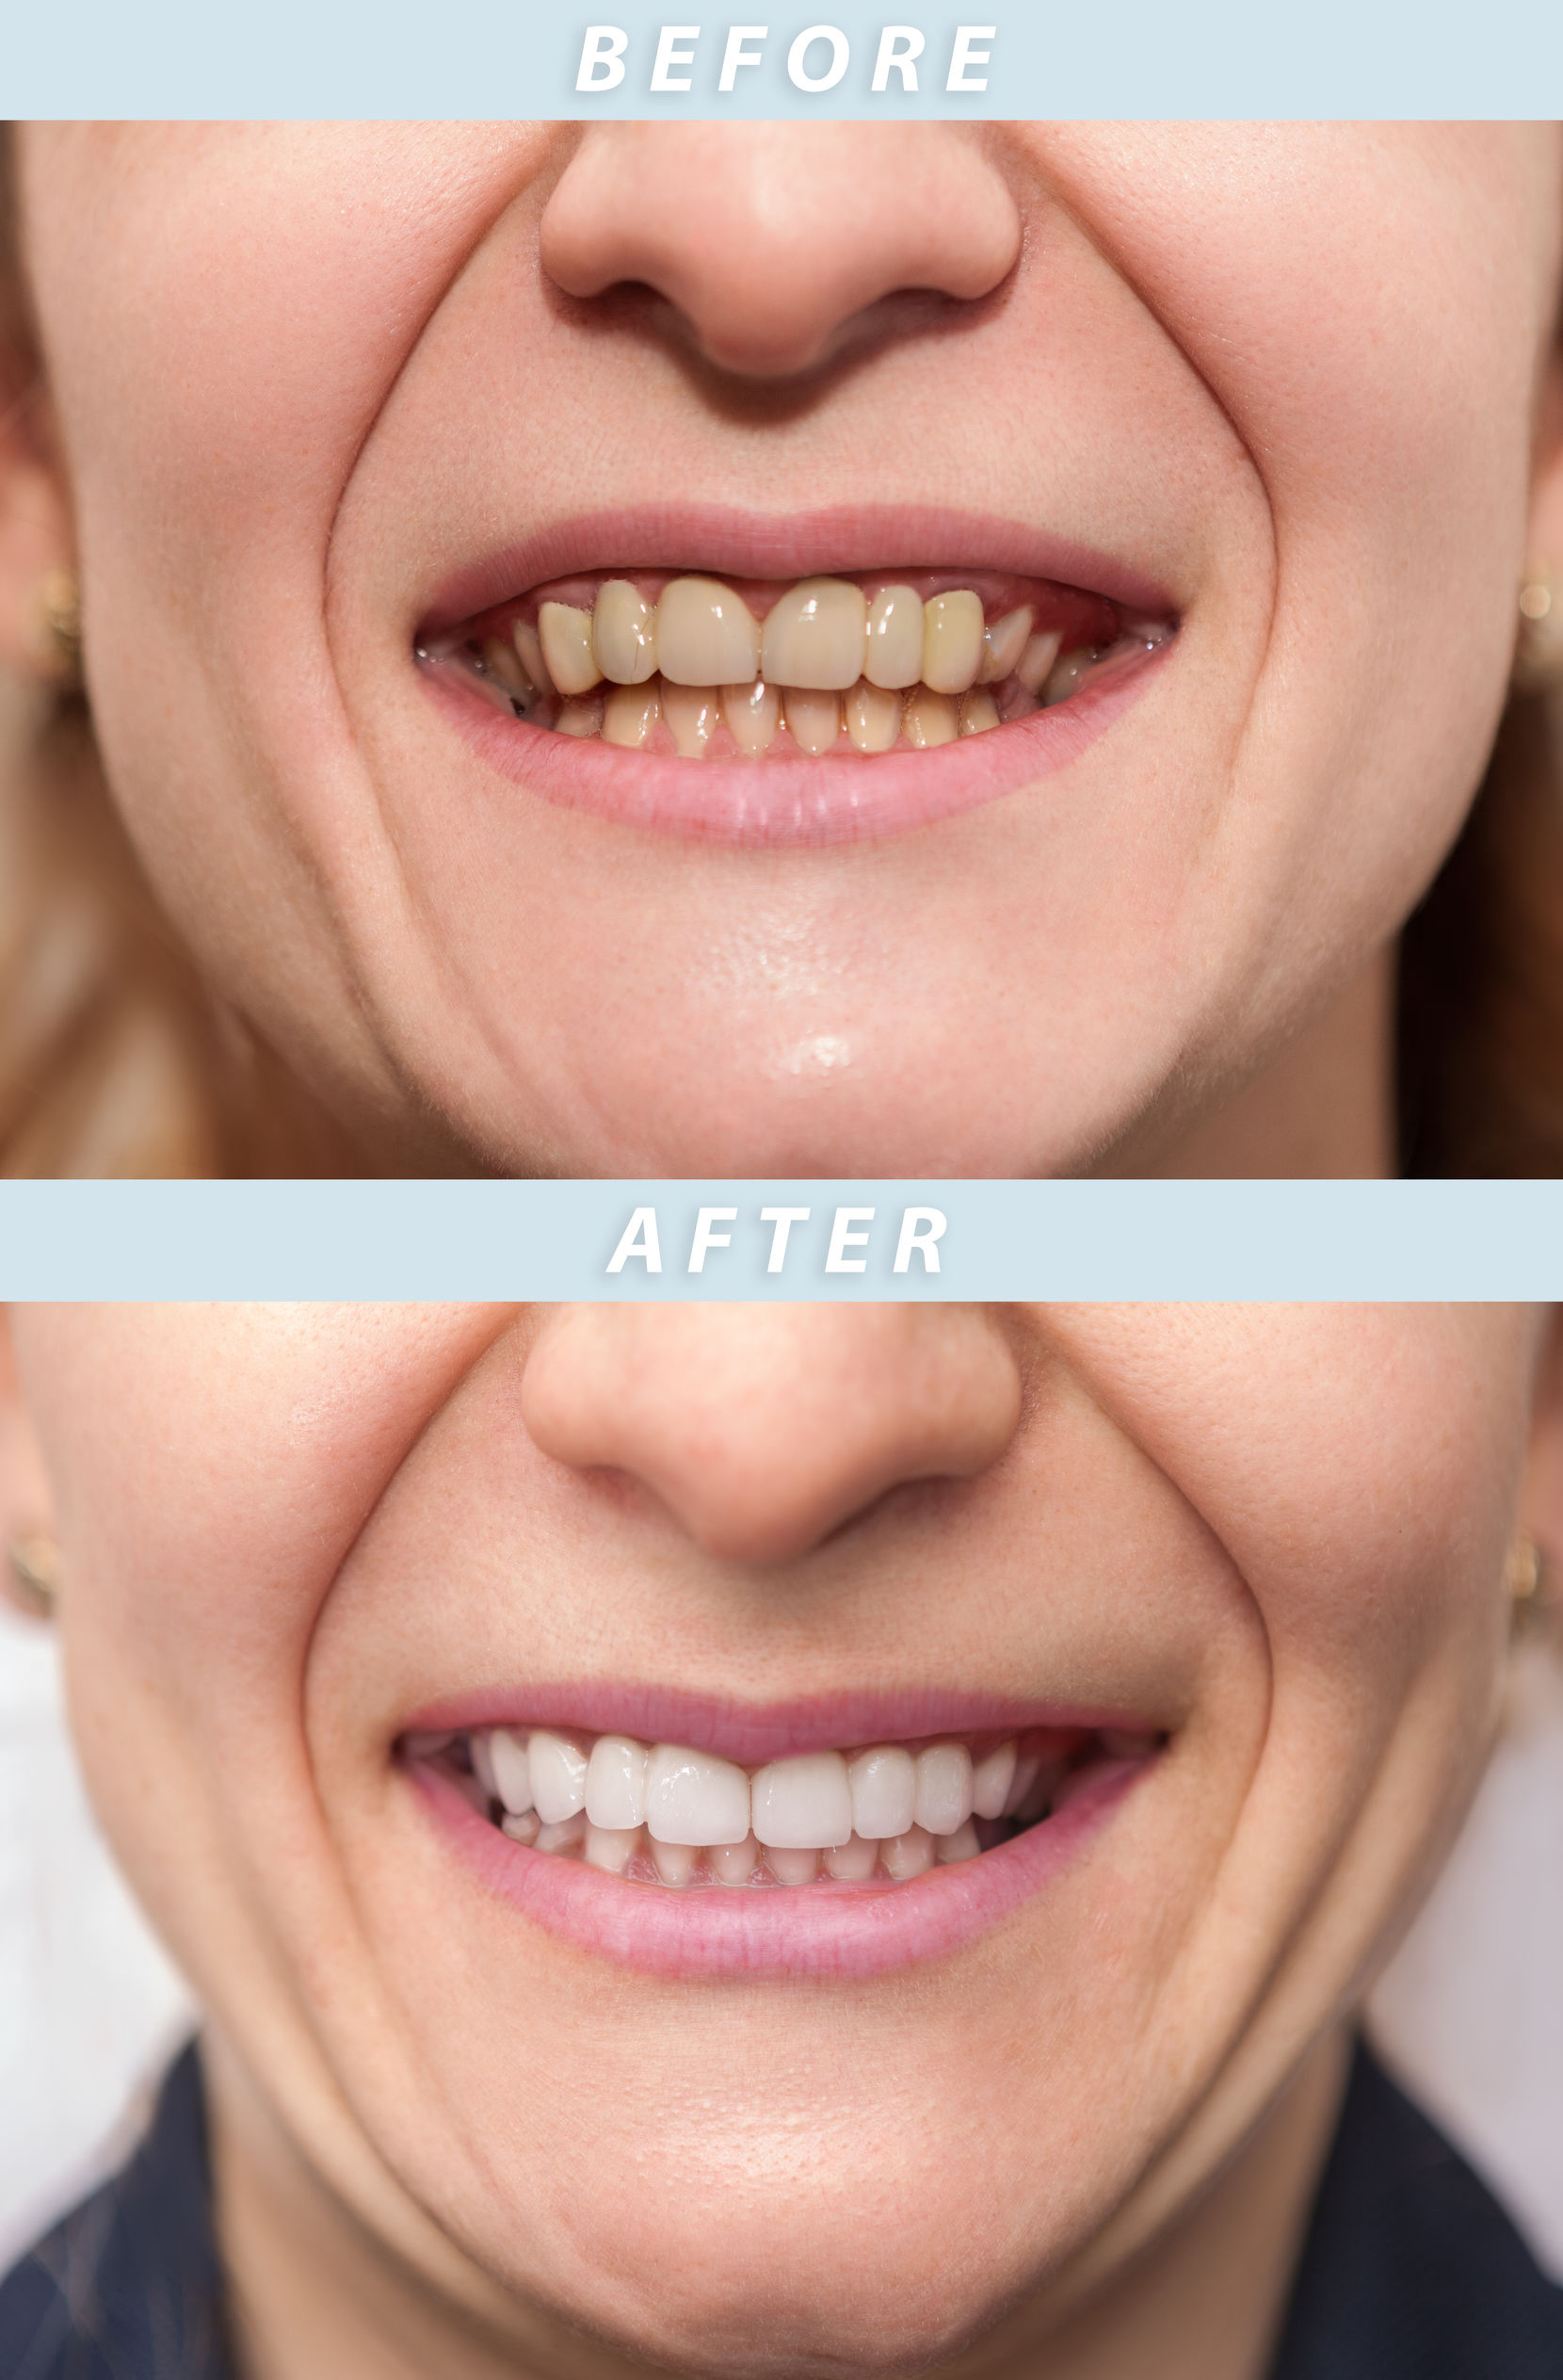 How to Tell if You Qualify for Veneers